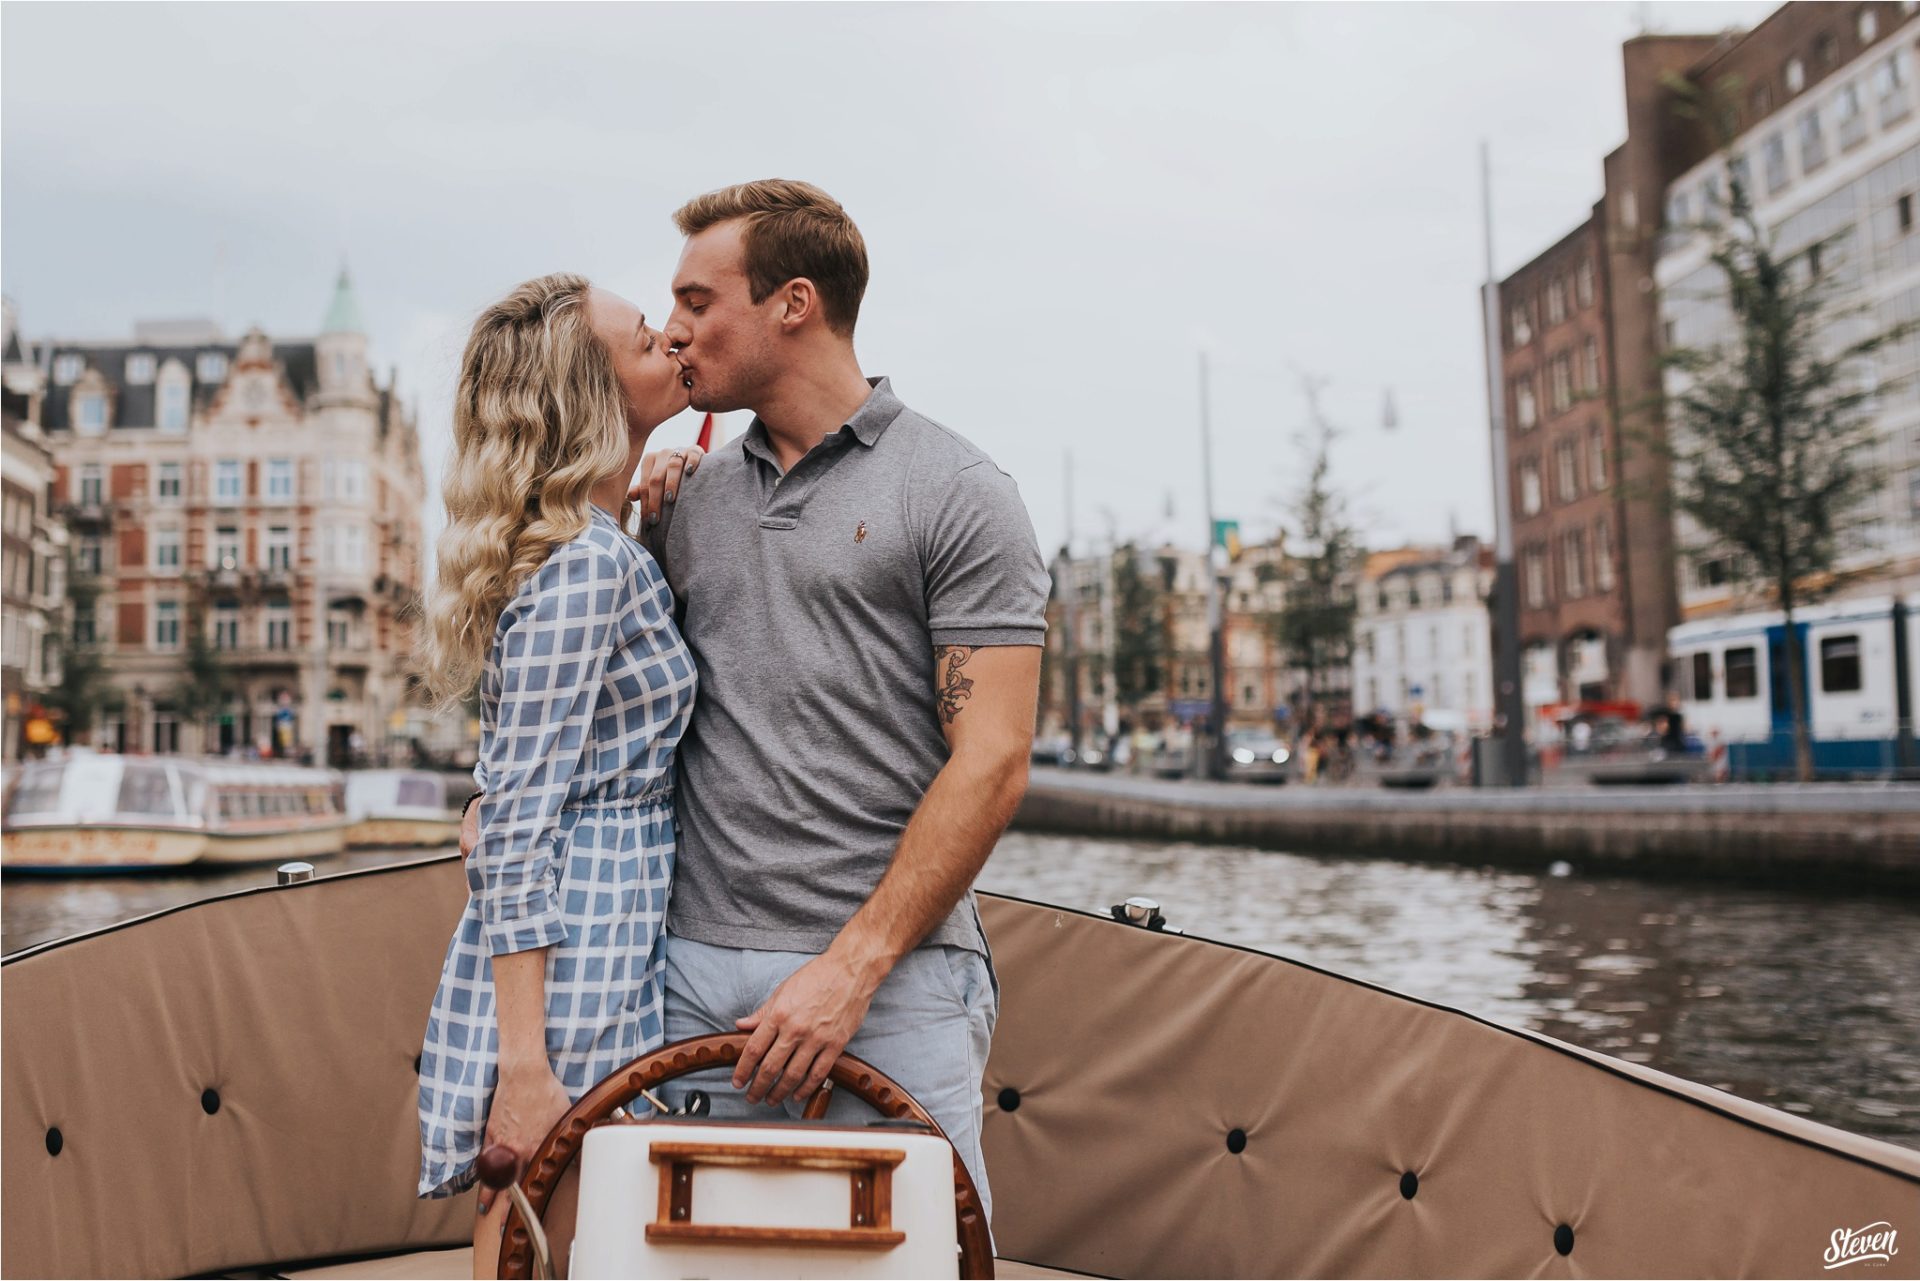 2017-09-20_0020-1920x1281 Canals of Amsterdam Engagement: Yllena and Stas Engagement 